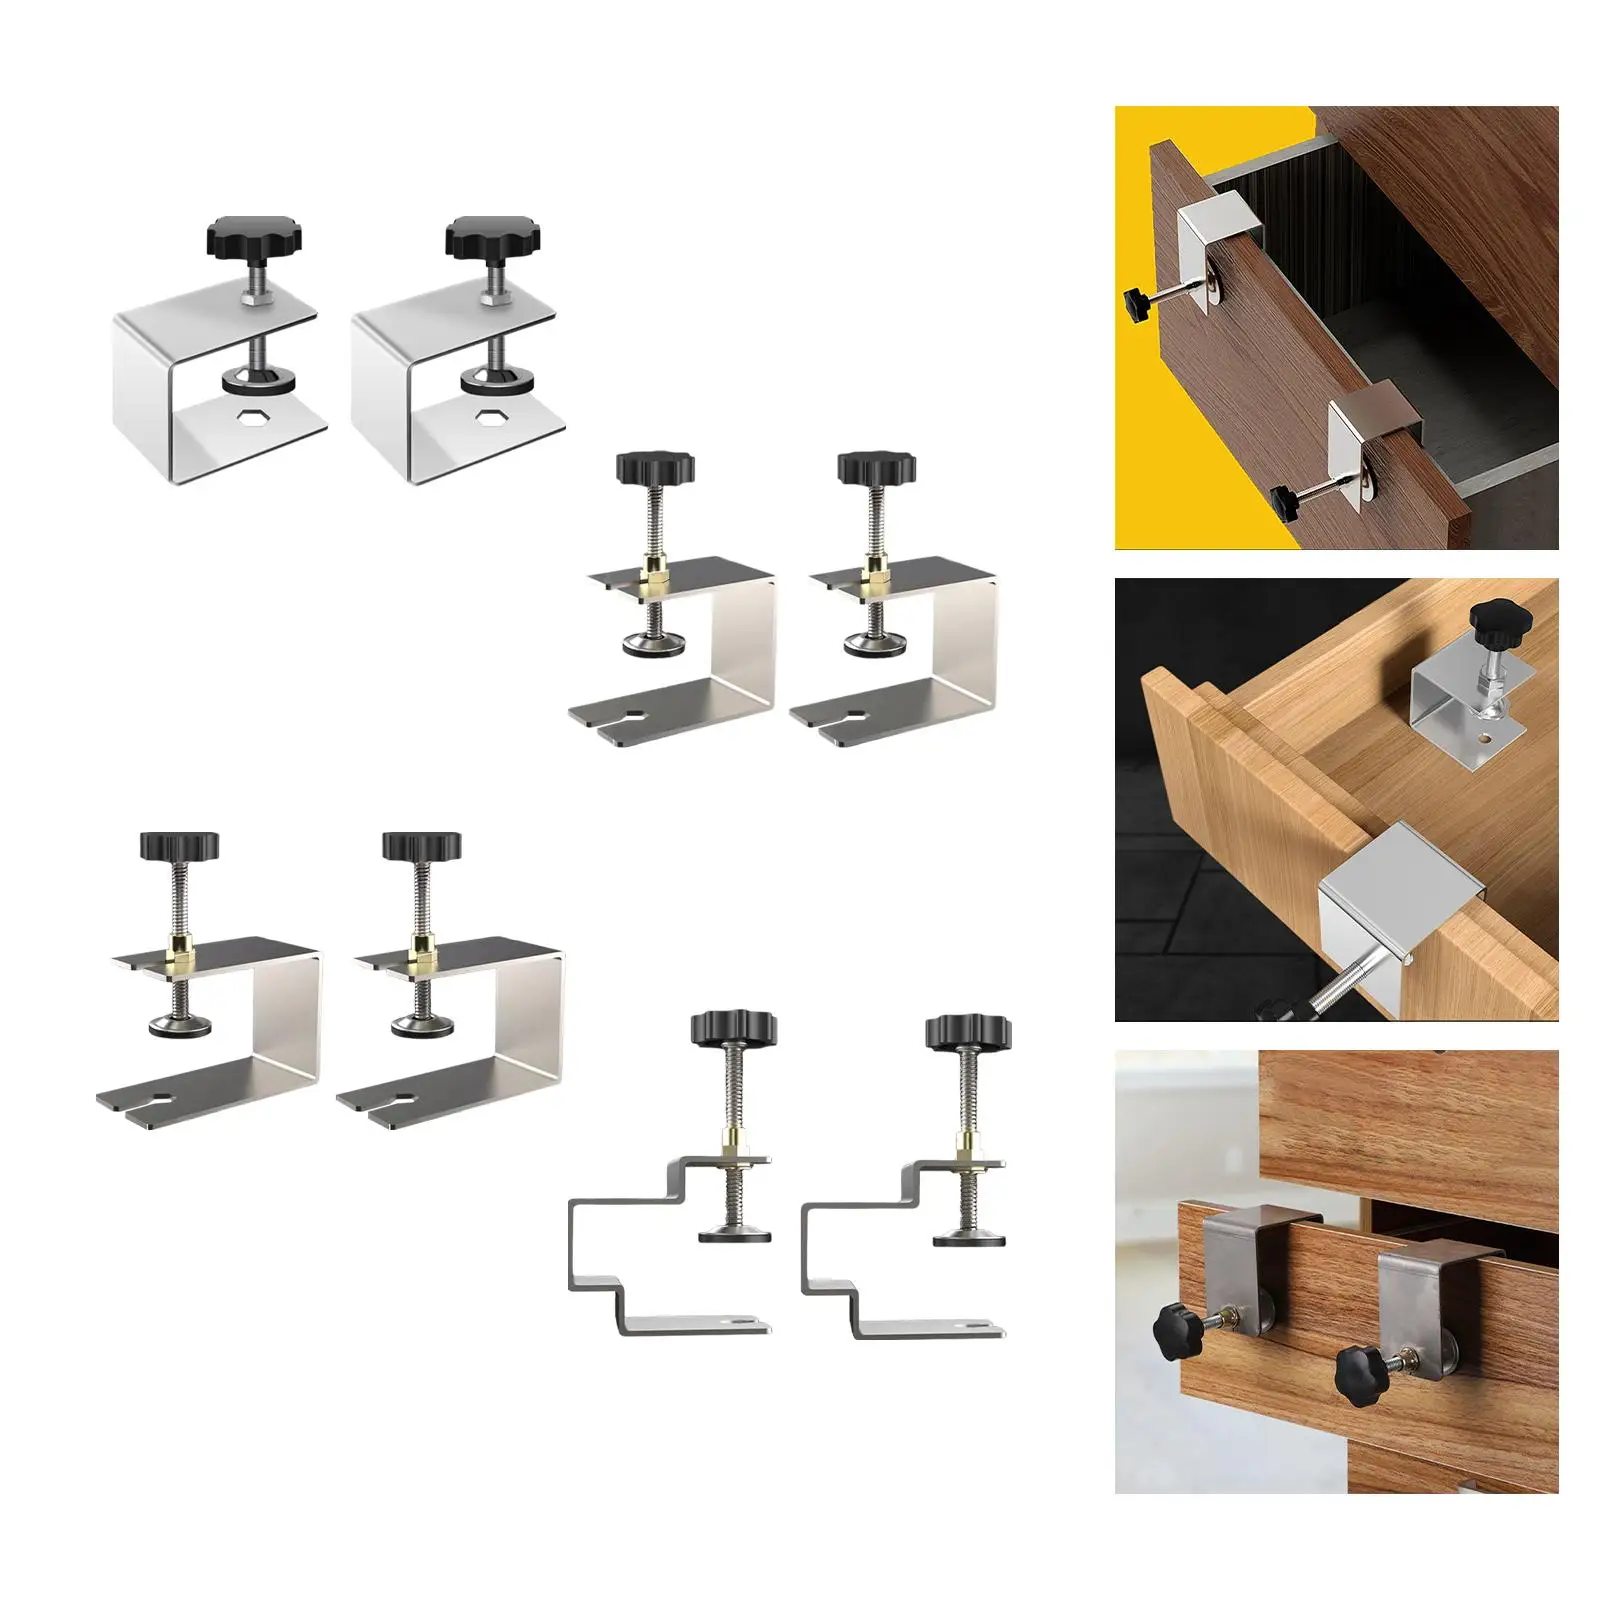 2x Universal Woodworking Clamp Drawer Front Clamps Accessories Adjustment Fixing Clip Fasten Stable Hardware Smooth